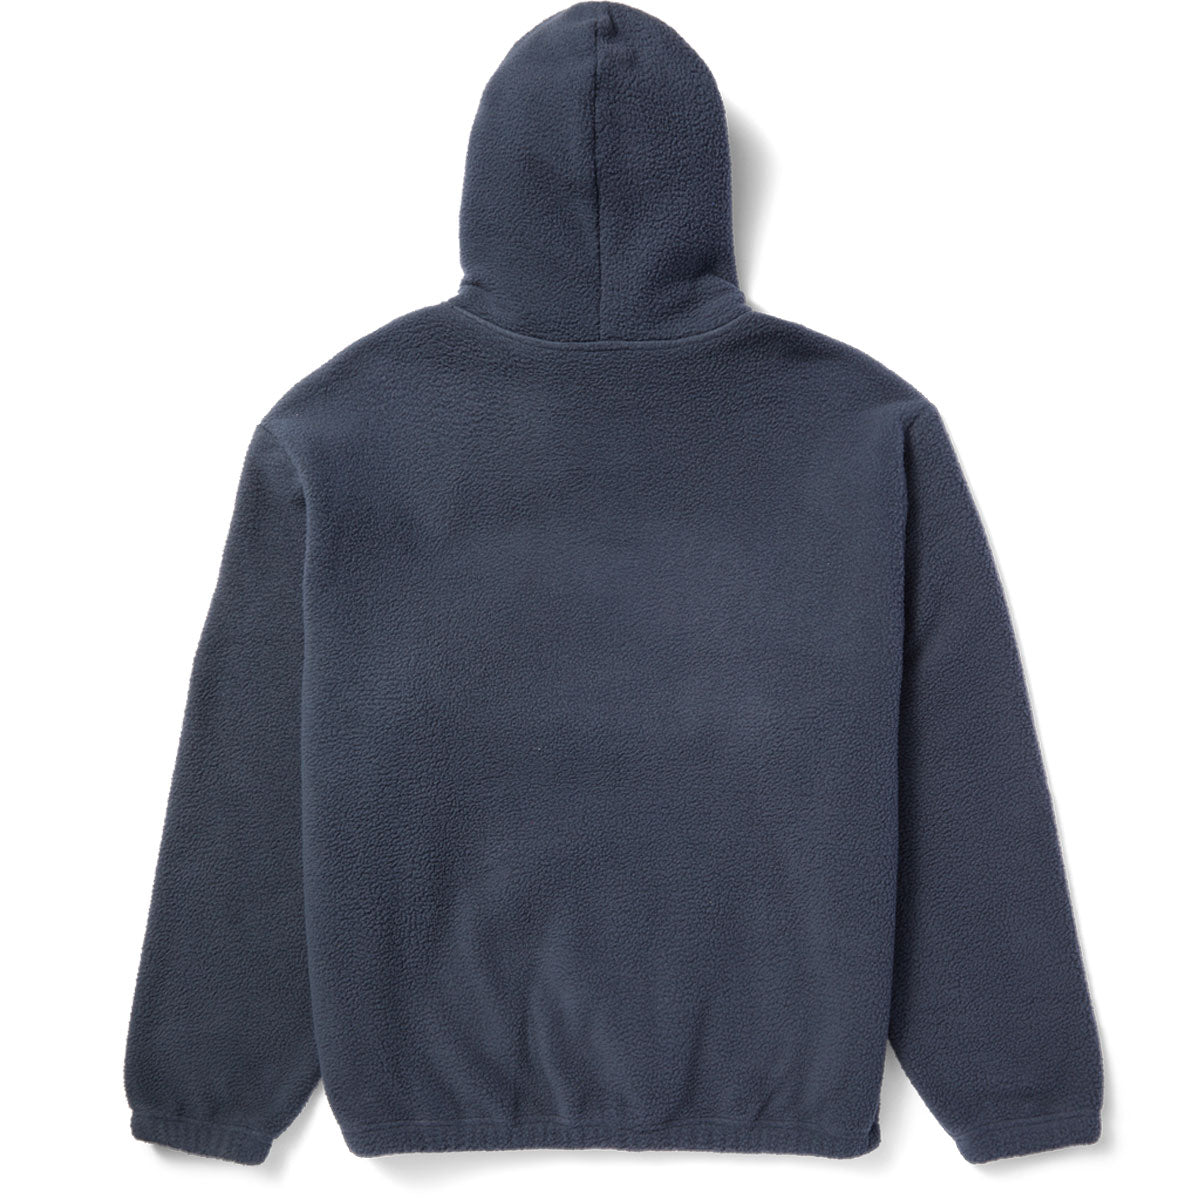 HUF Griffith Hoodie - Blue Night image 4